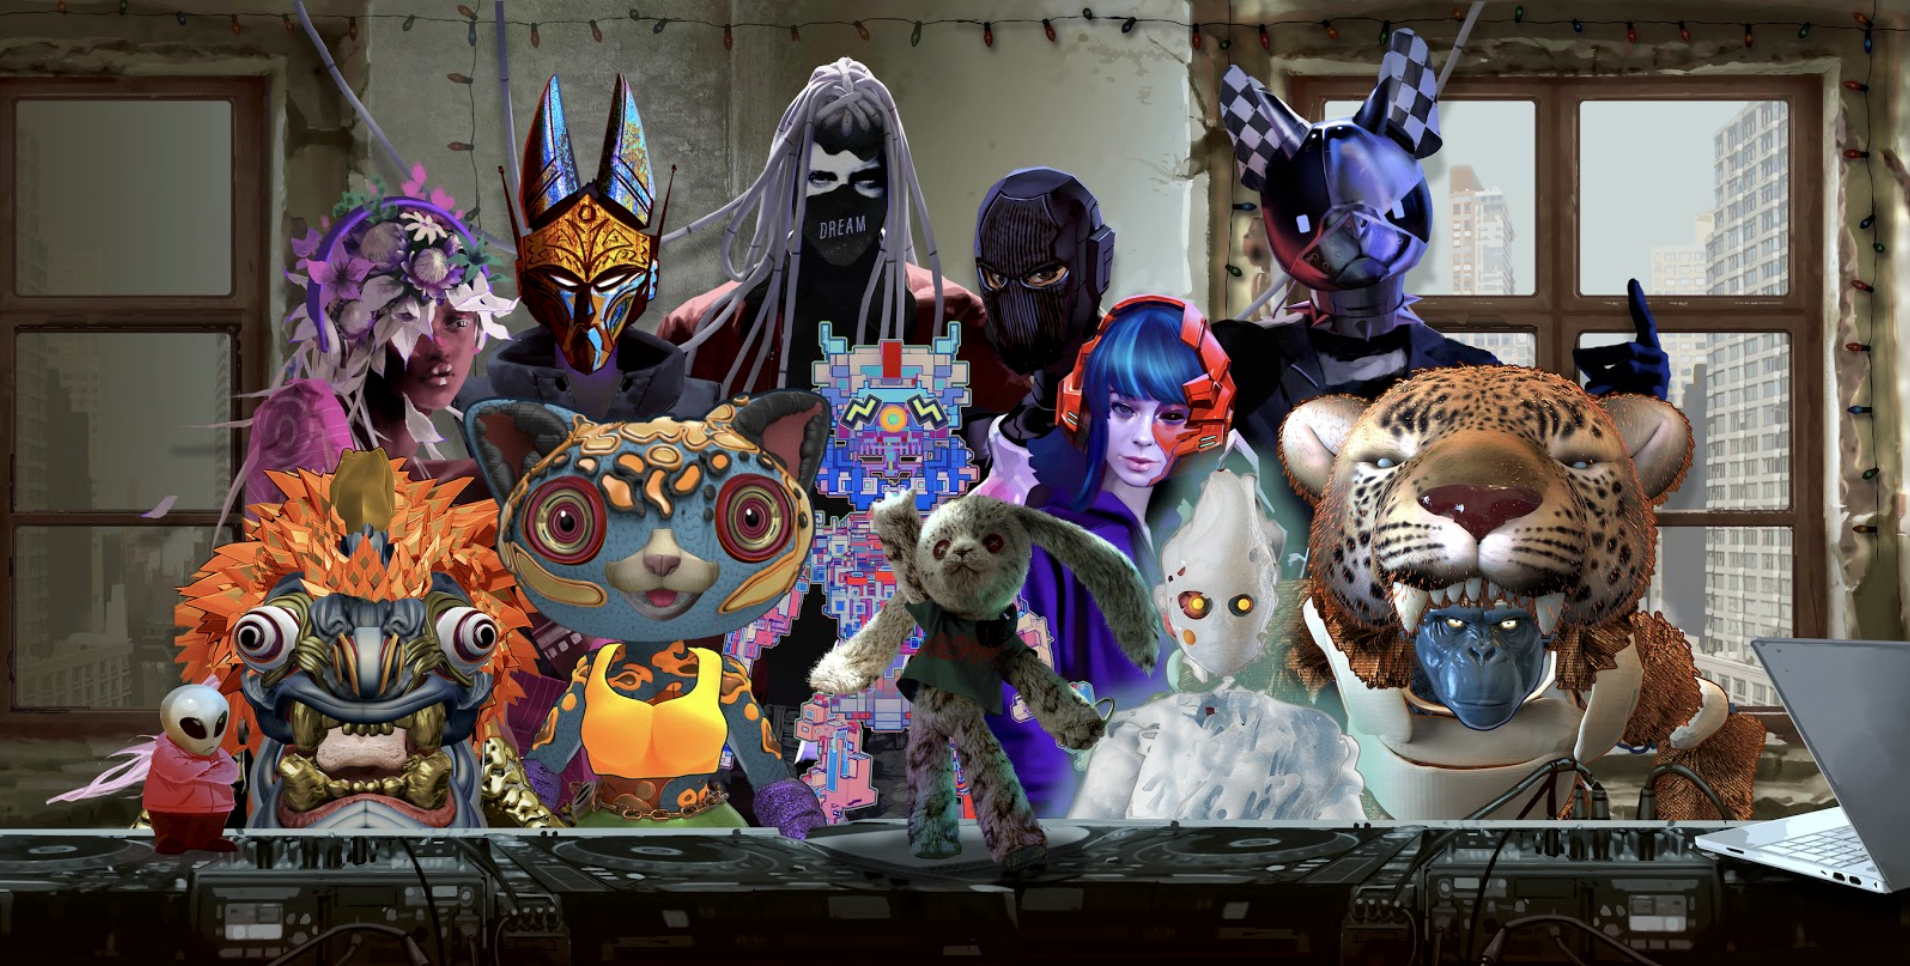 The first iteration of the WarpSound collective.Can you spot DJ Dragoon, Nayomi & Gnar Heart?